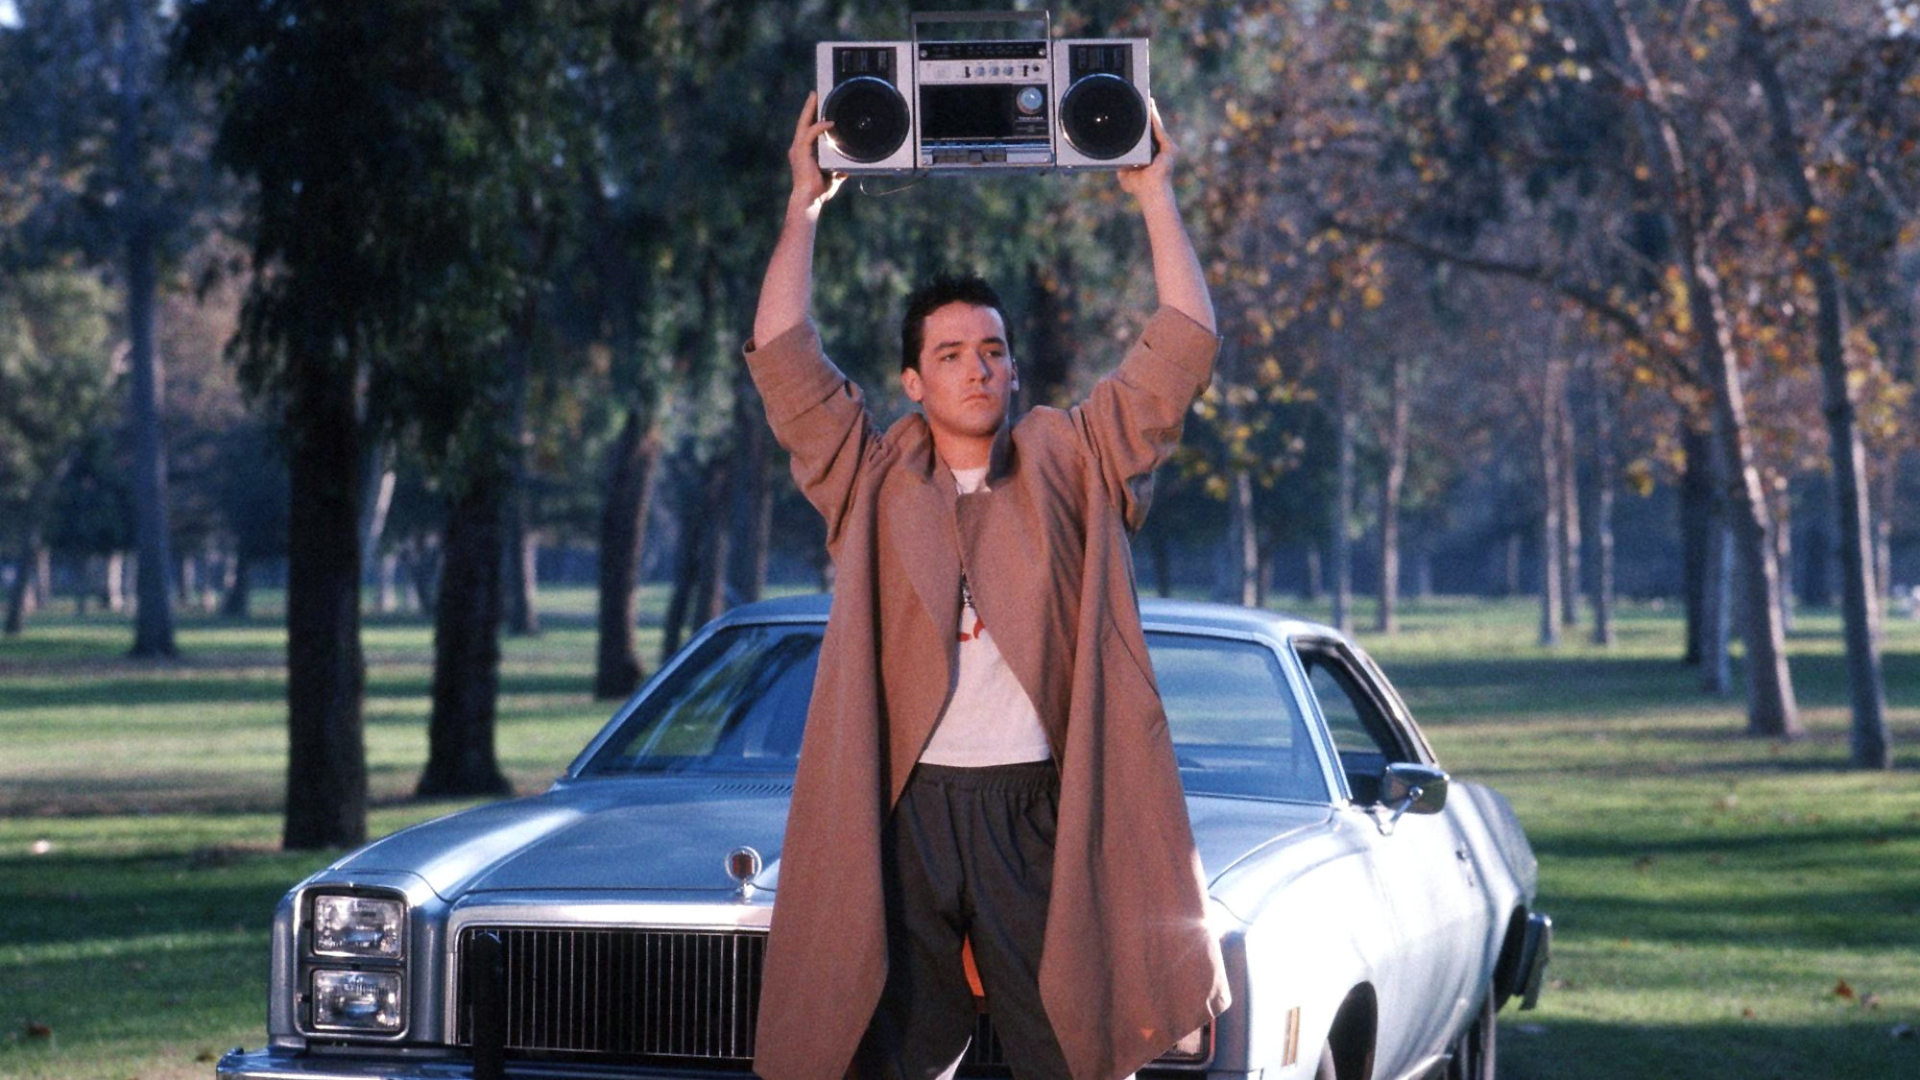 Iconic Scene from movie "Say Anything"